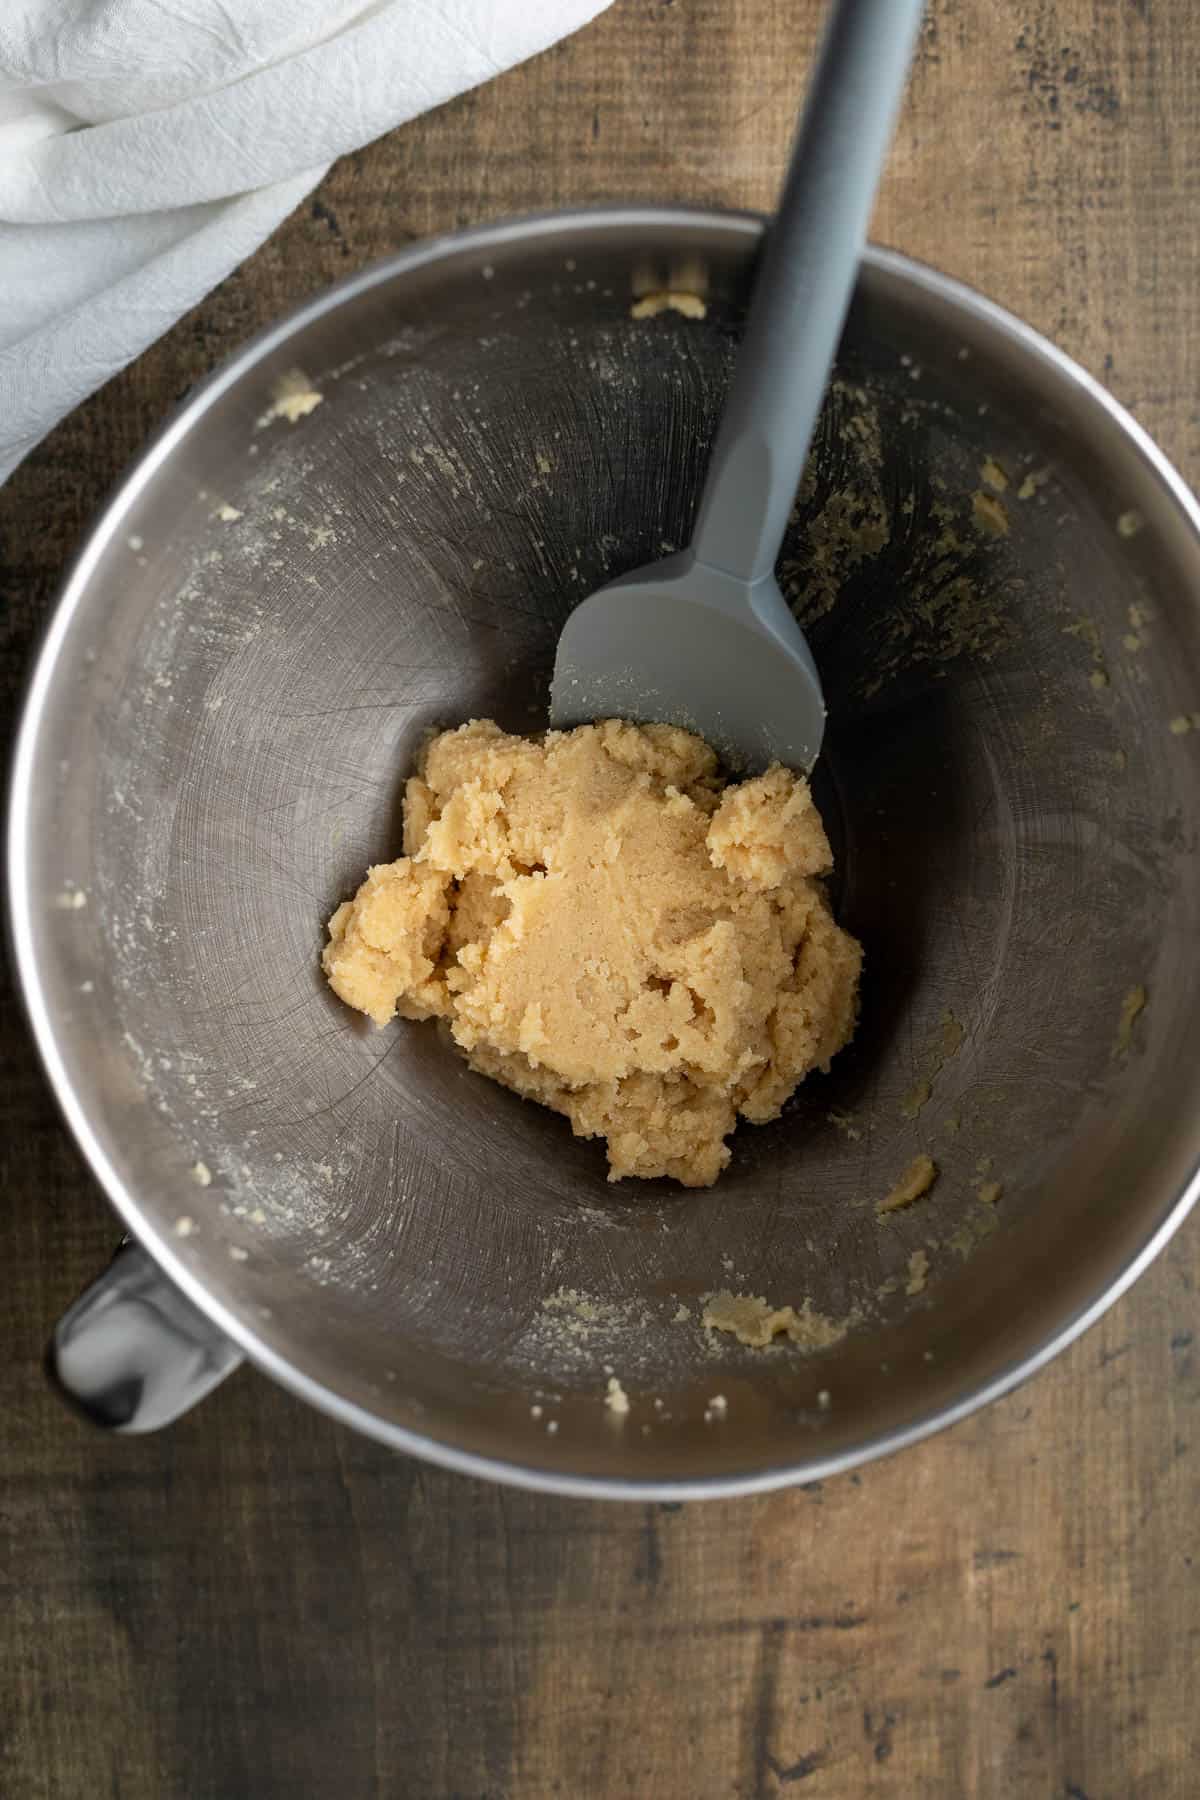 Creamed butter and sugars in a mixing bowl.